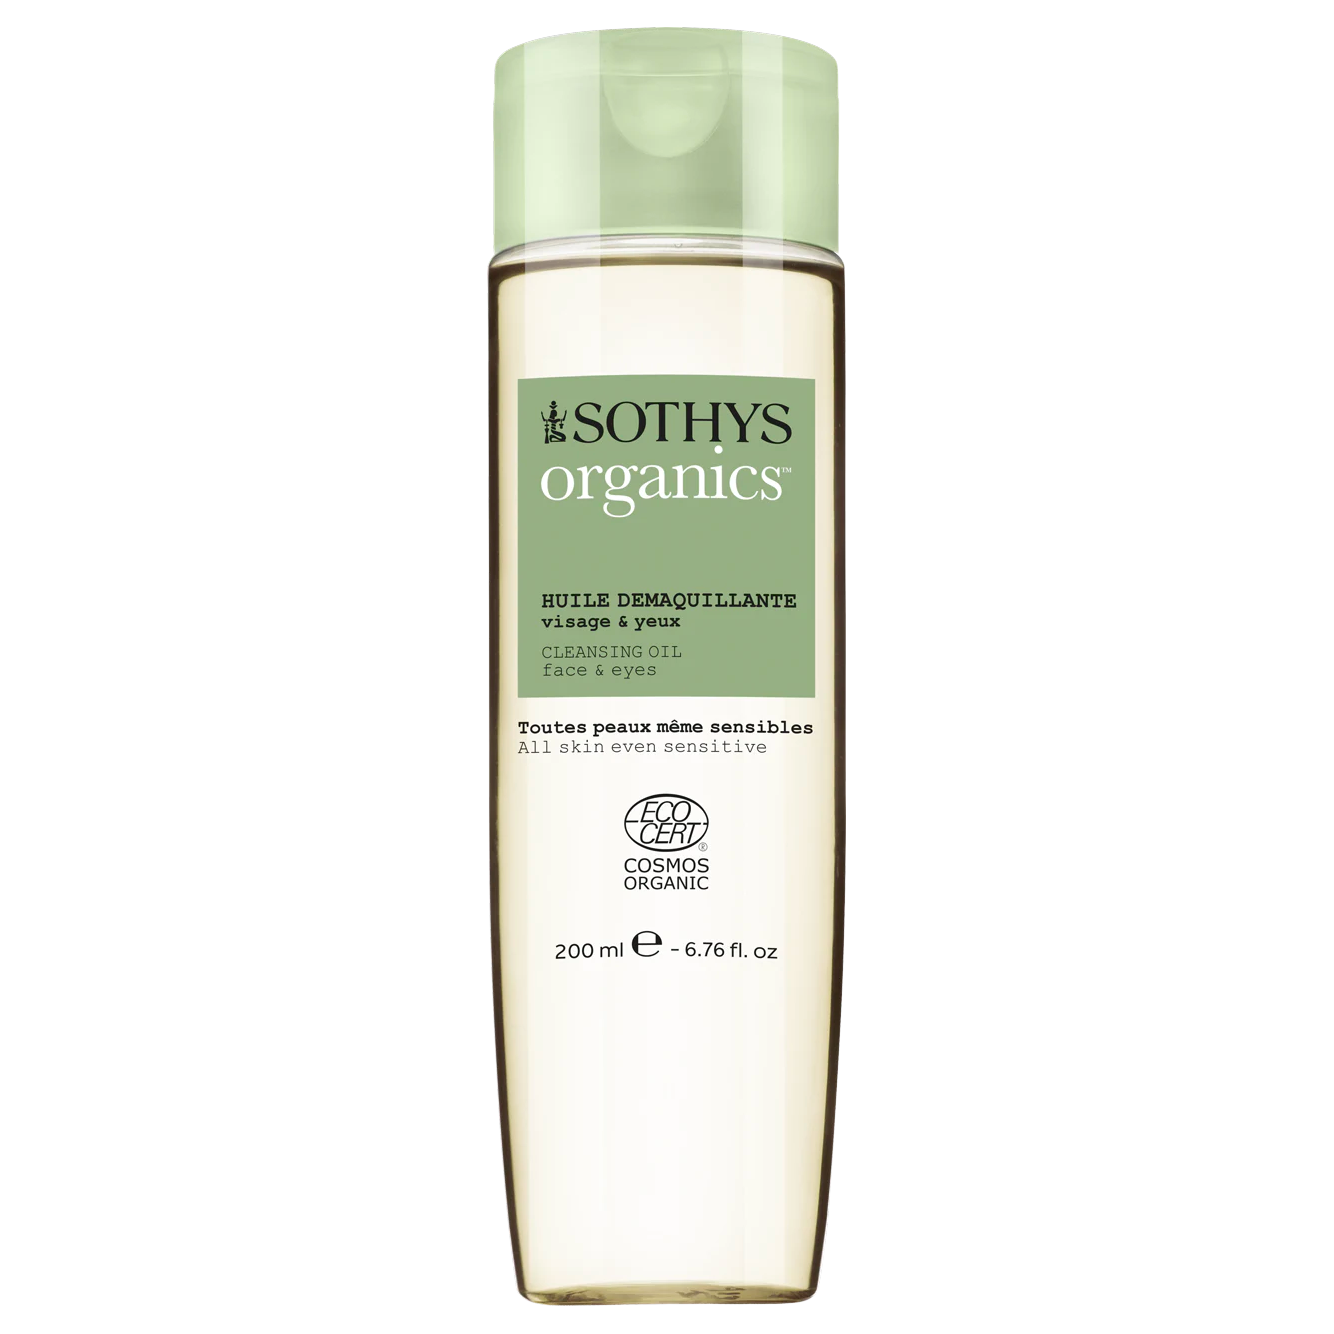 Sothys Organics Cleansing Oil face and eyes 200mil